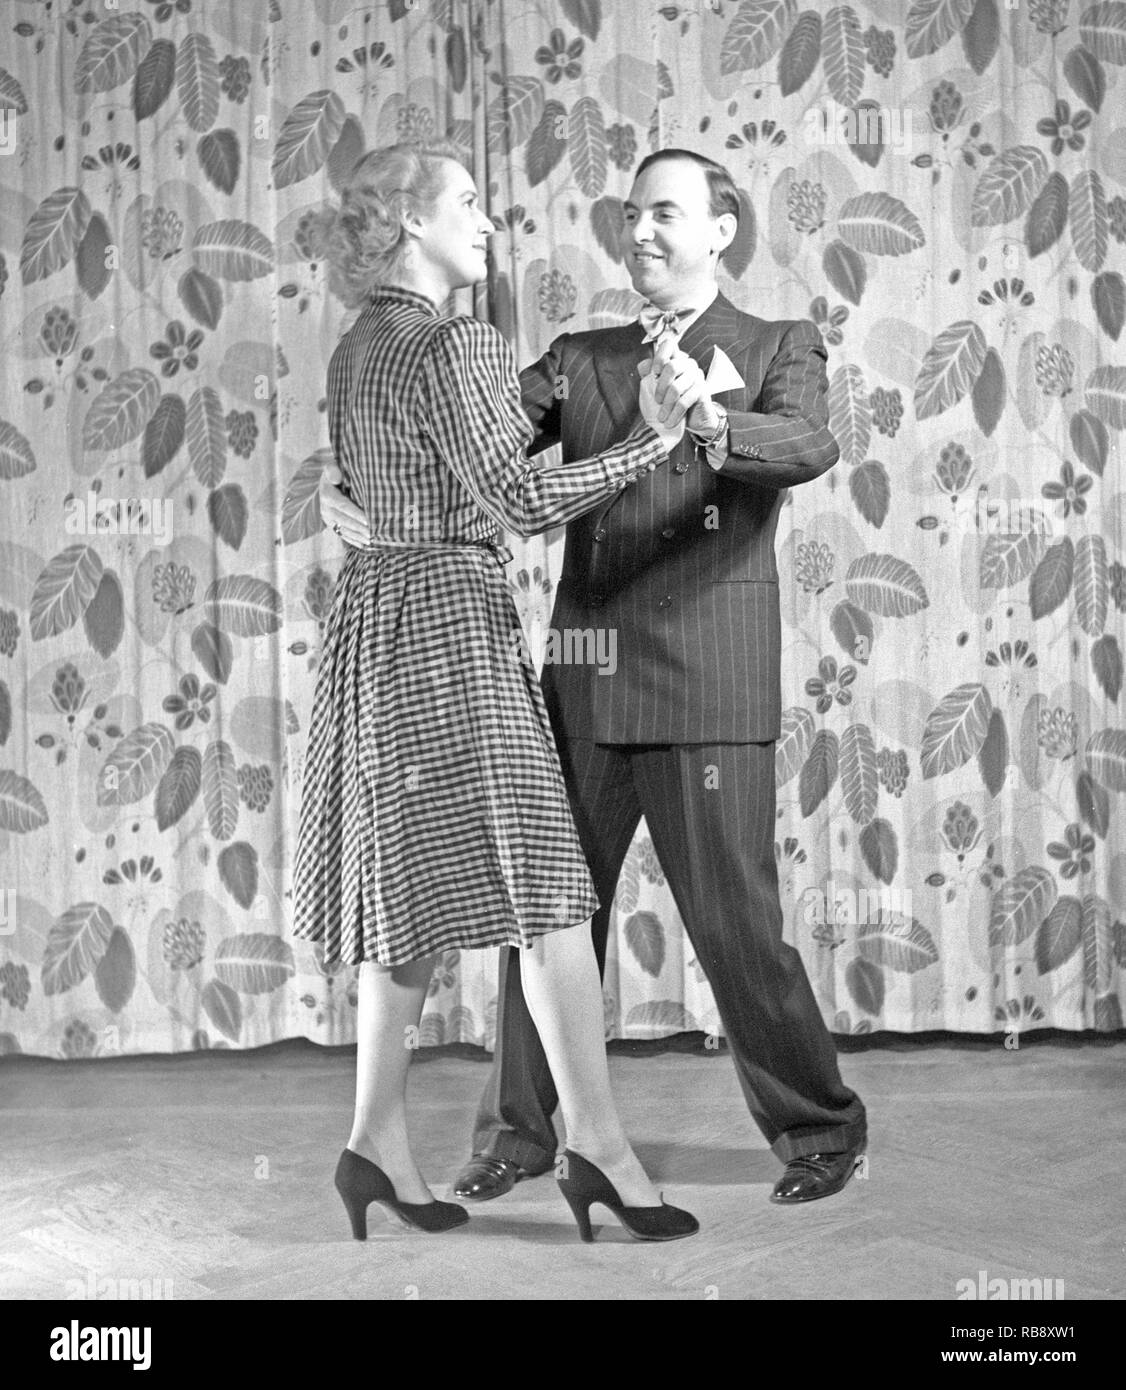 Learning to dance in the 1940s. A couple is dancing together. An instructiv image on how to position and move to the music, although which dance they are dancing is not known. Sweden 1946. Photo: Kristoffersson ref Y57-6 Stock Photo